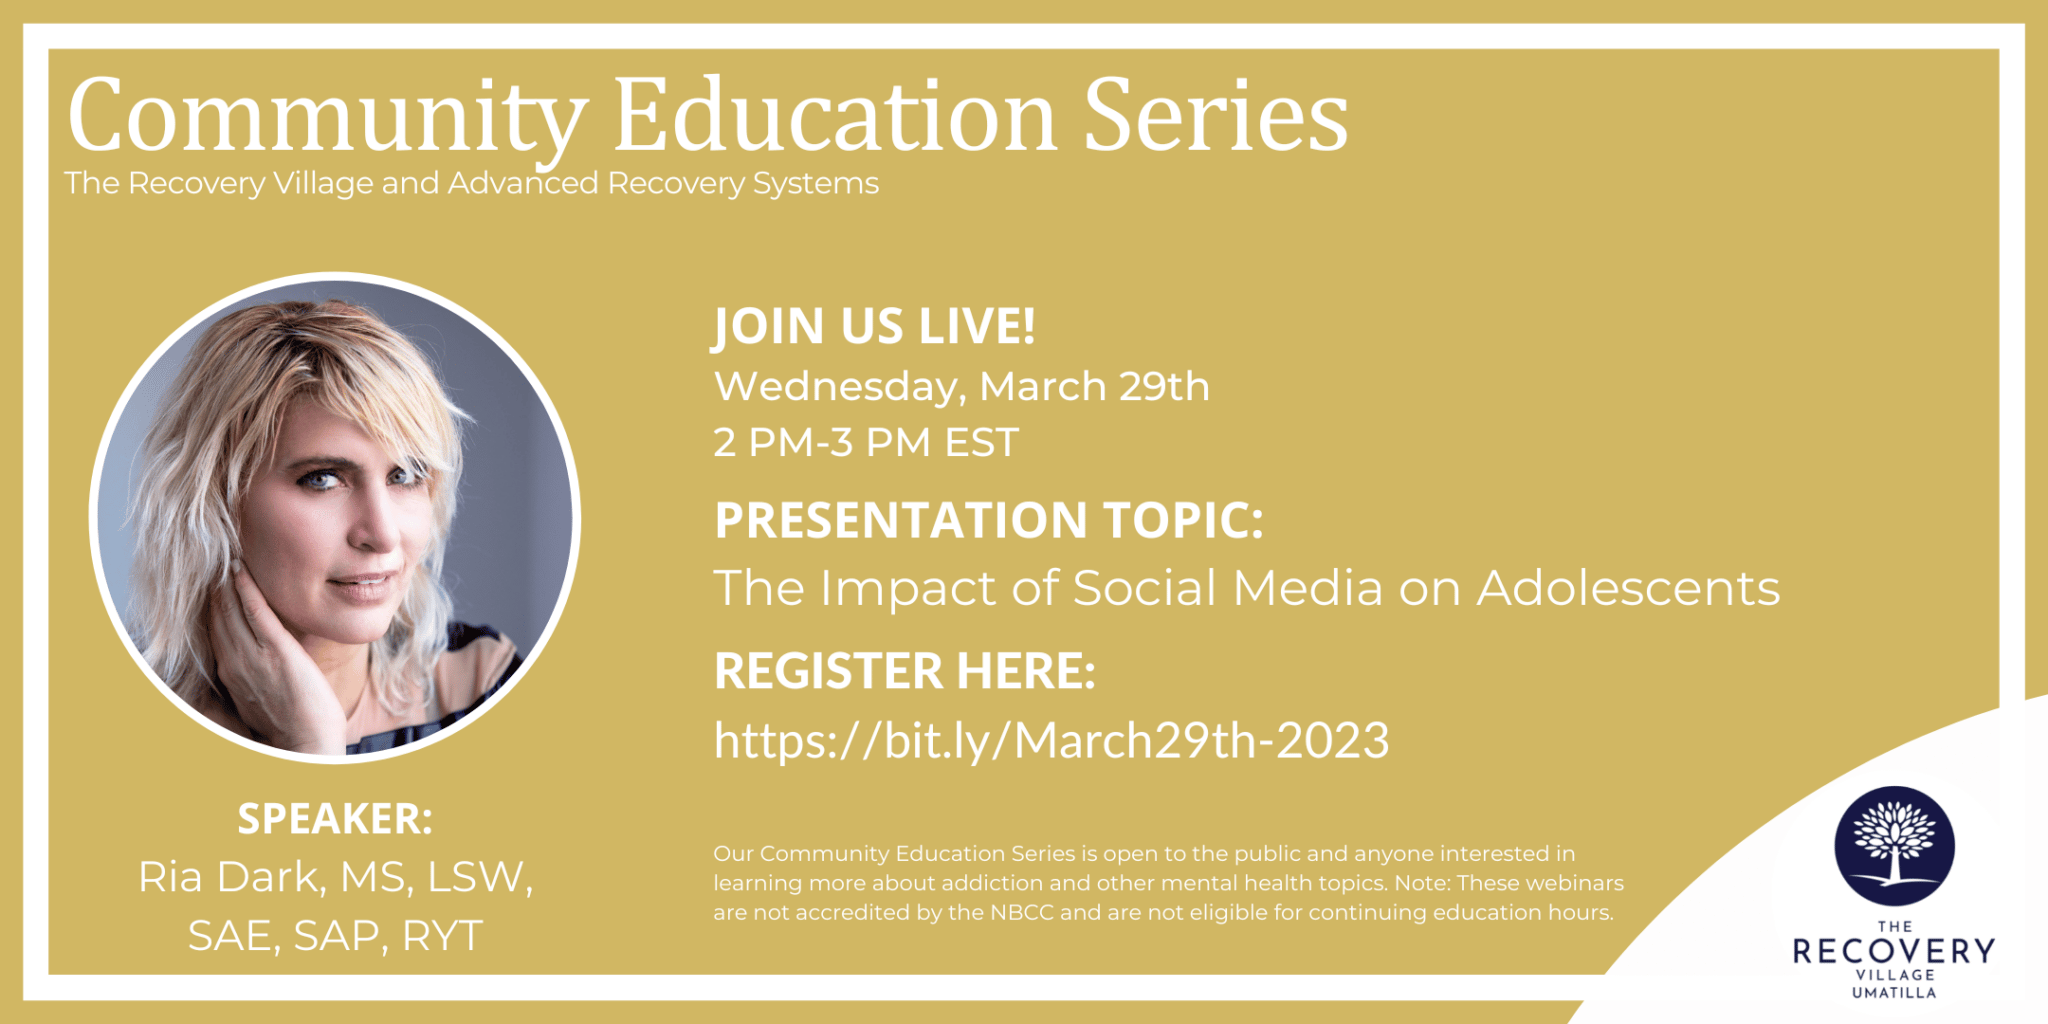 Community Education Series: The Impact of Social Media on Adolescents